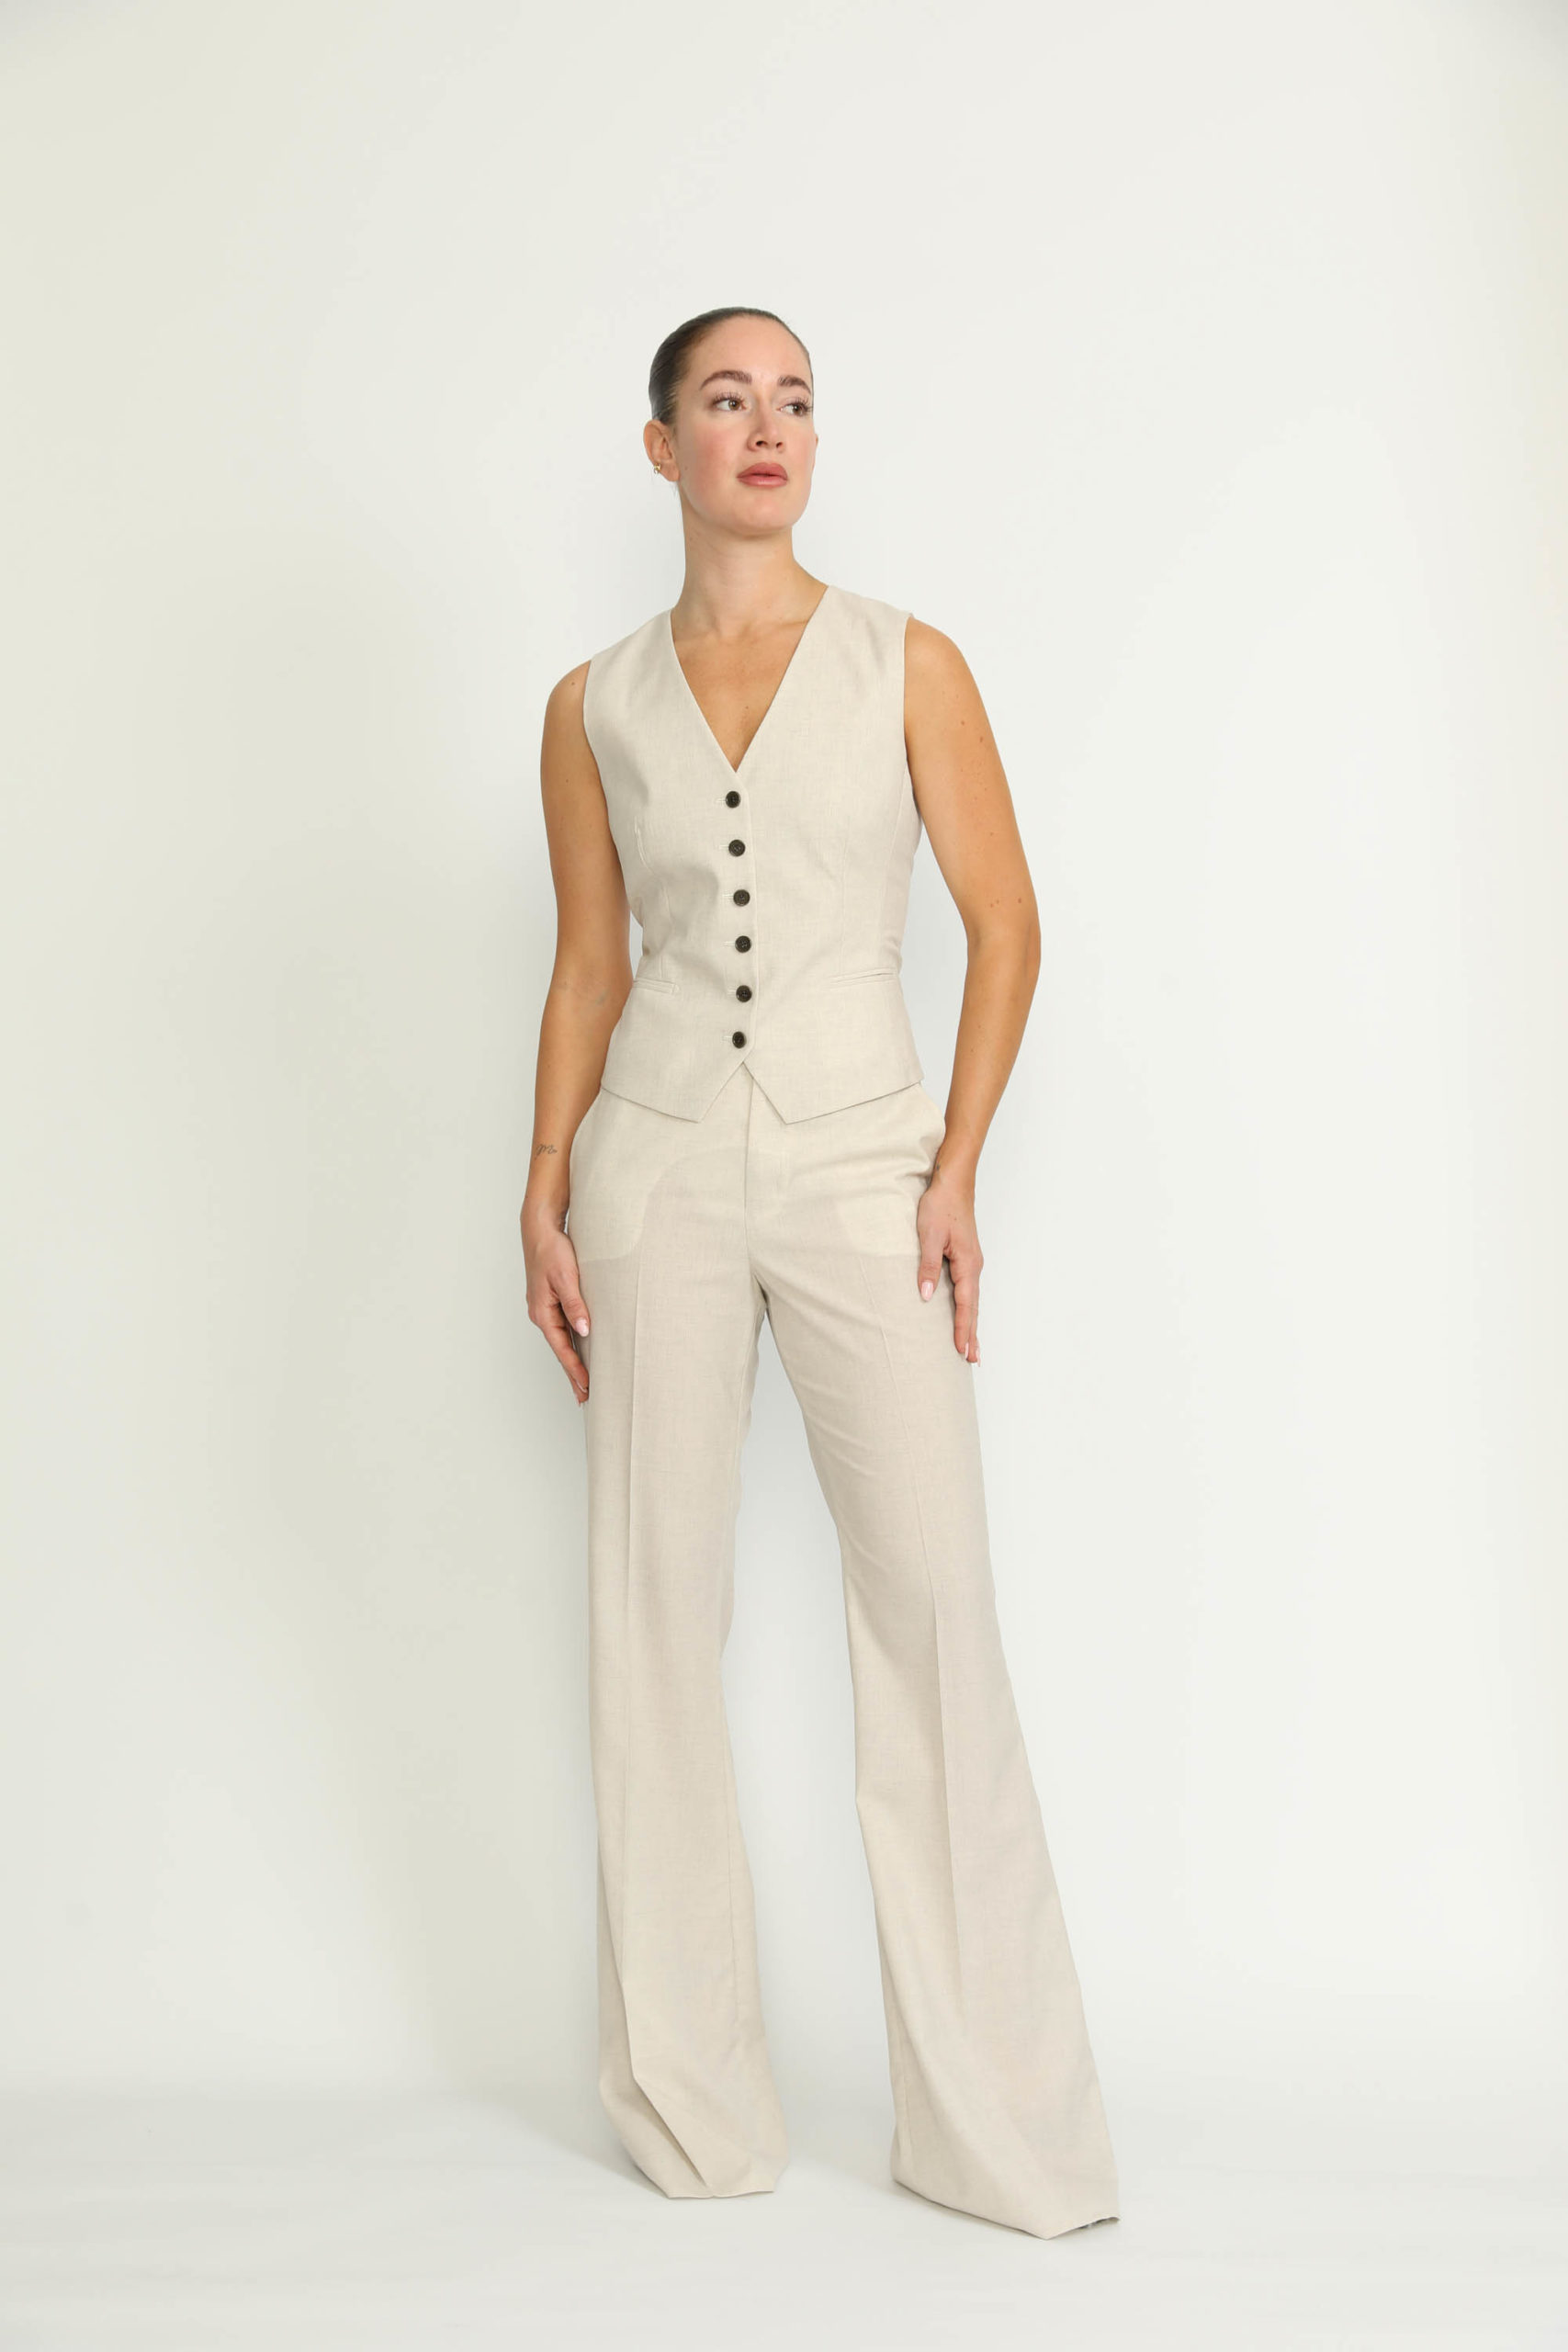 Sursee Trousers – Sursee Bell Bottom Flared Vanilla White Trousers